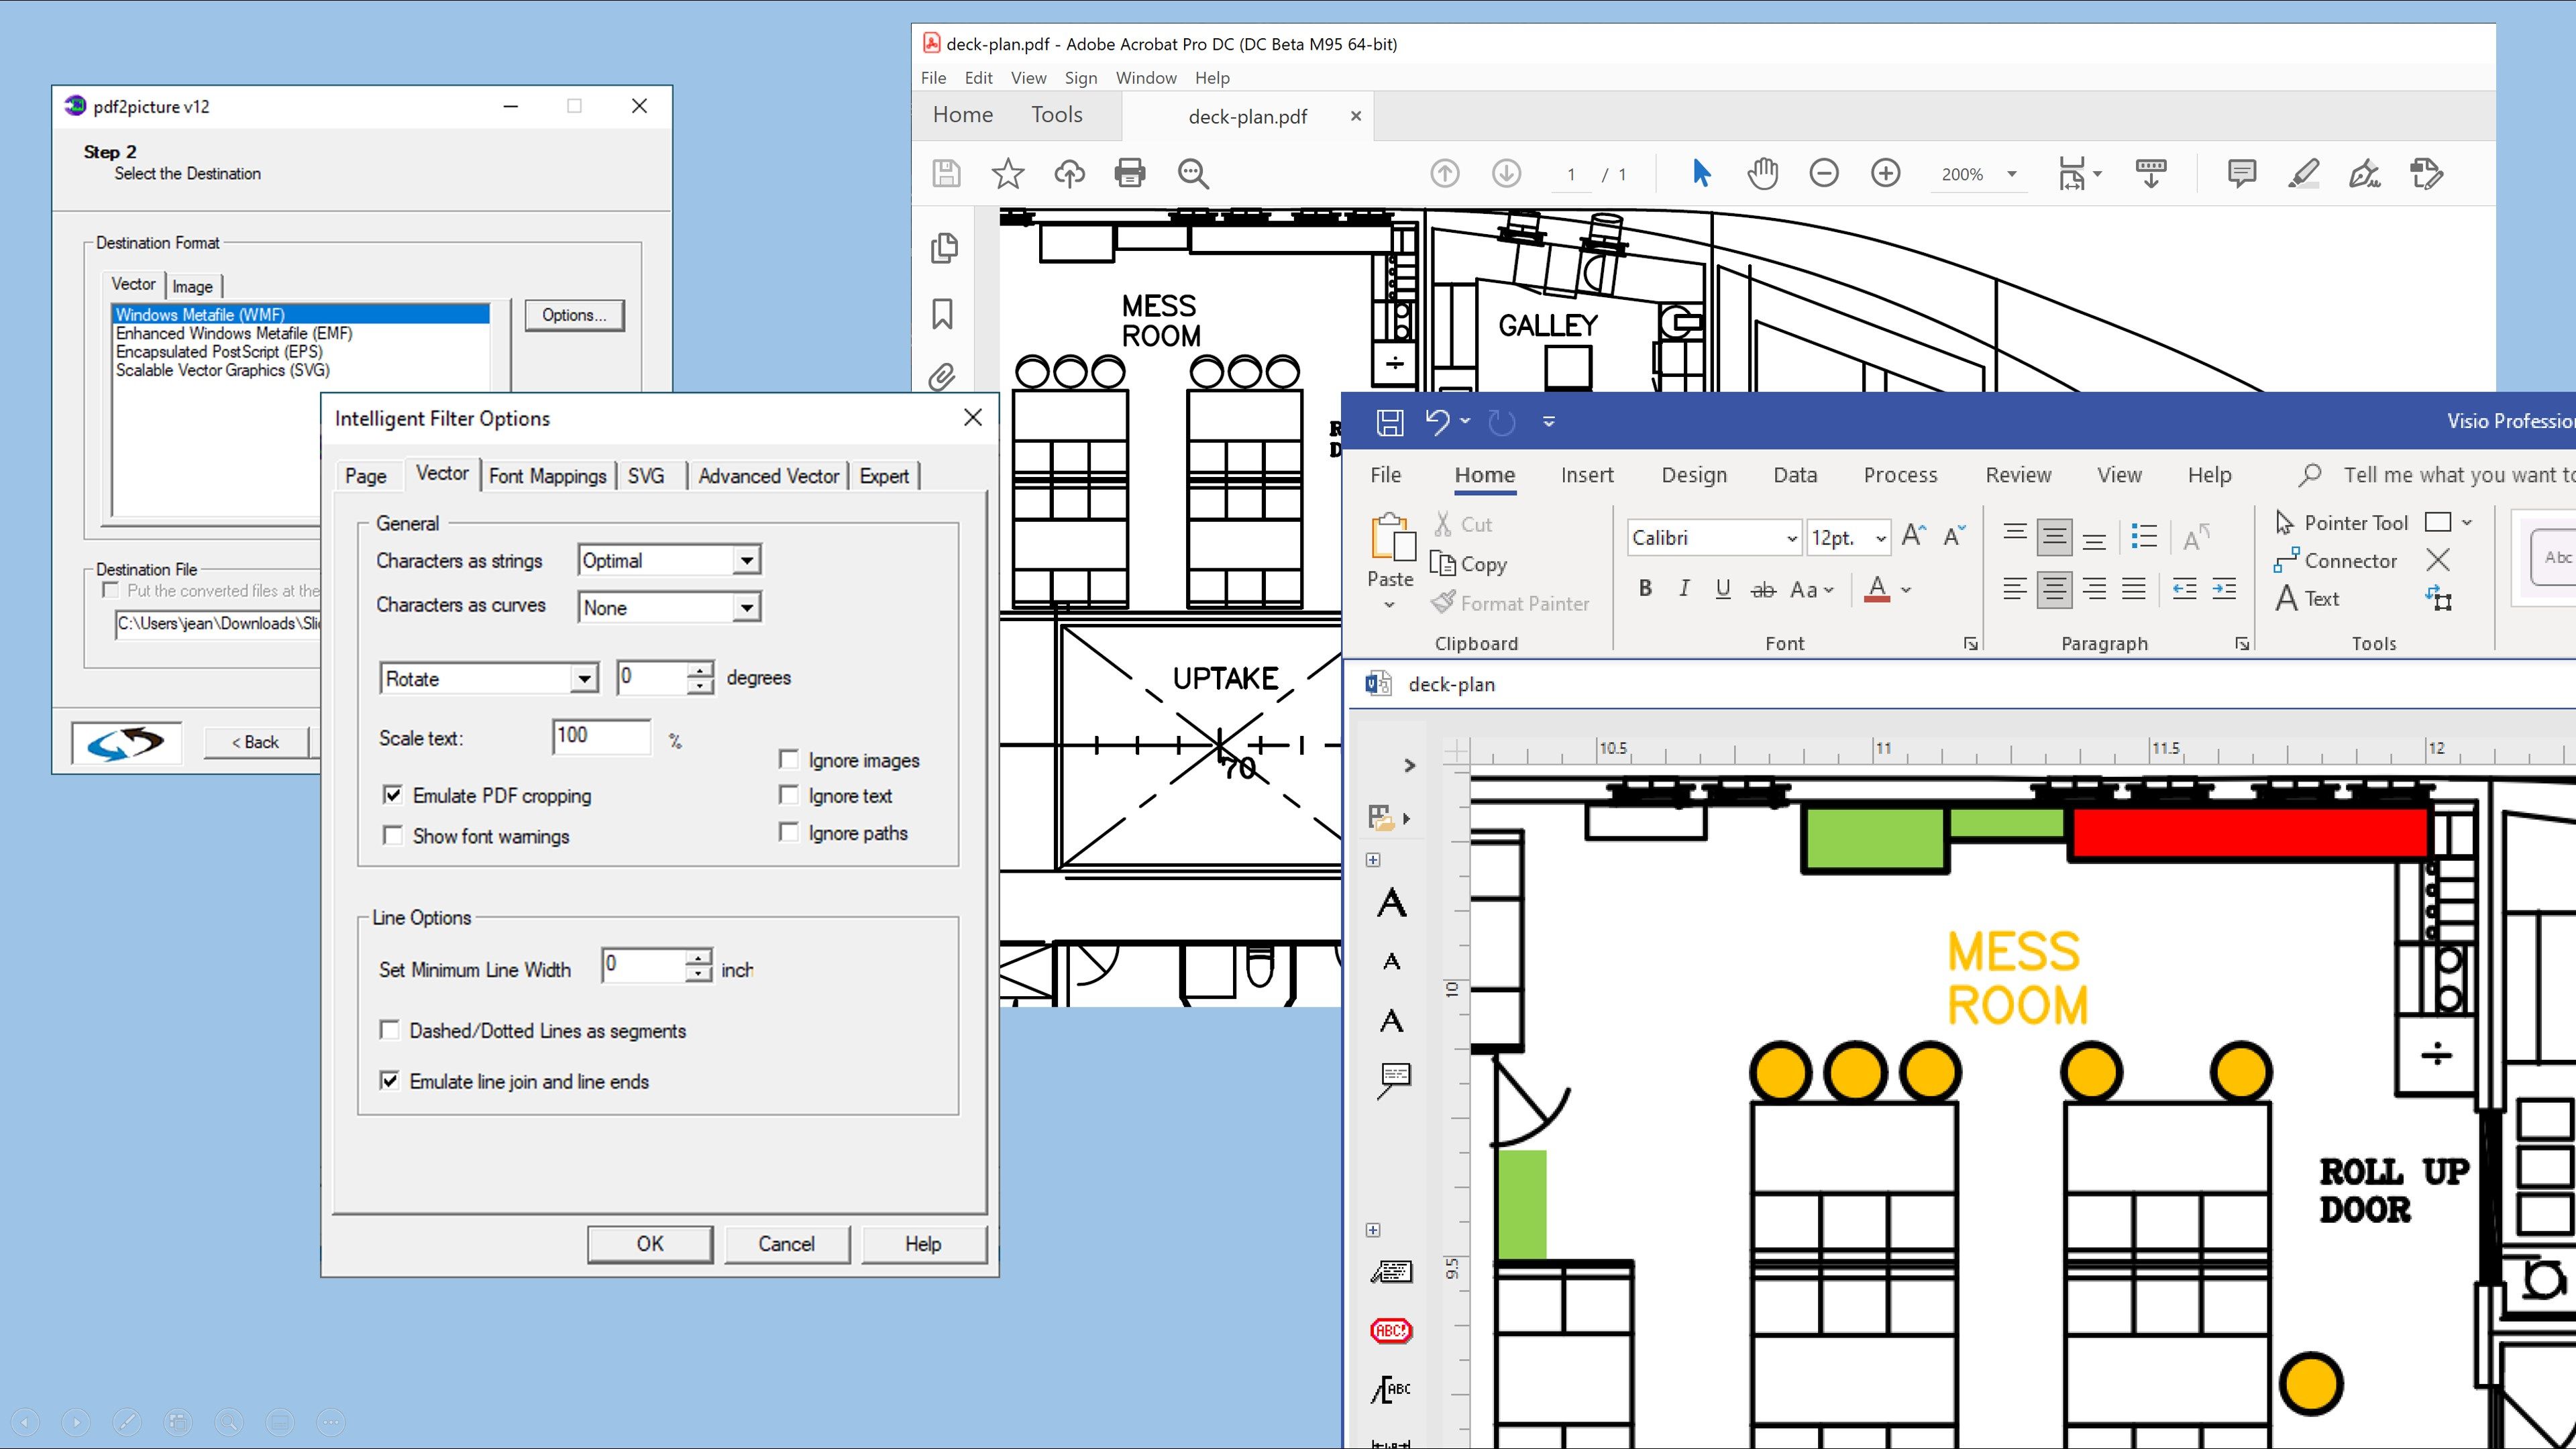 Open and edit PDF graphics in Visio and Microsoft Office. Select the file, choose conversion options and then open the file. Modify all objects, text, layers, attributes, and more!